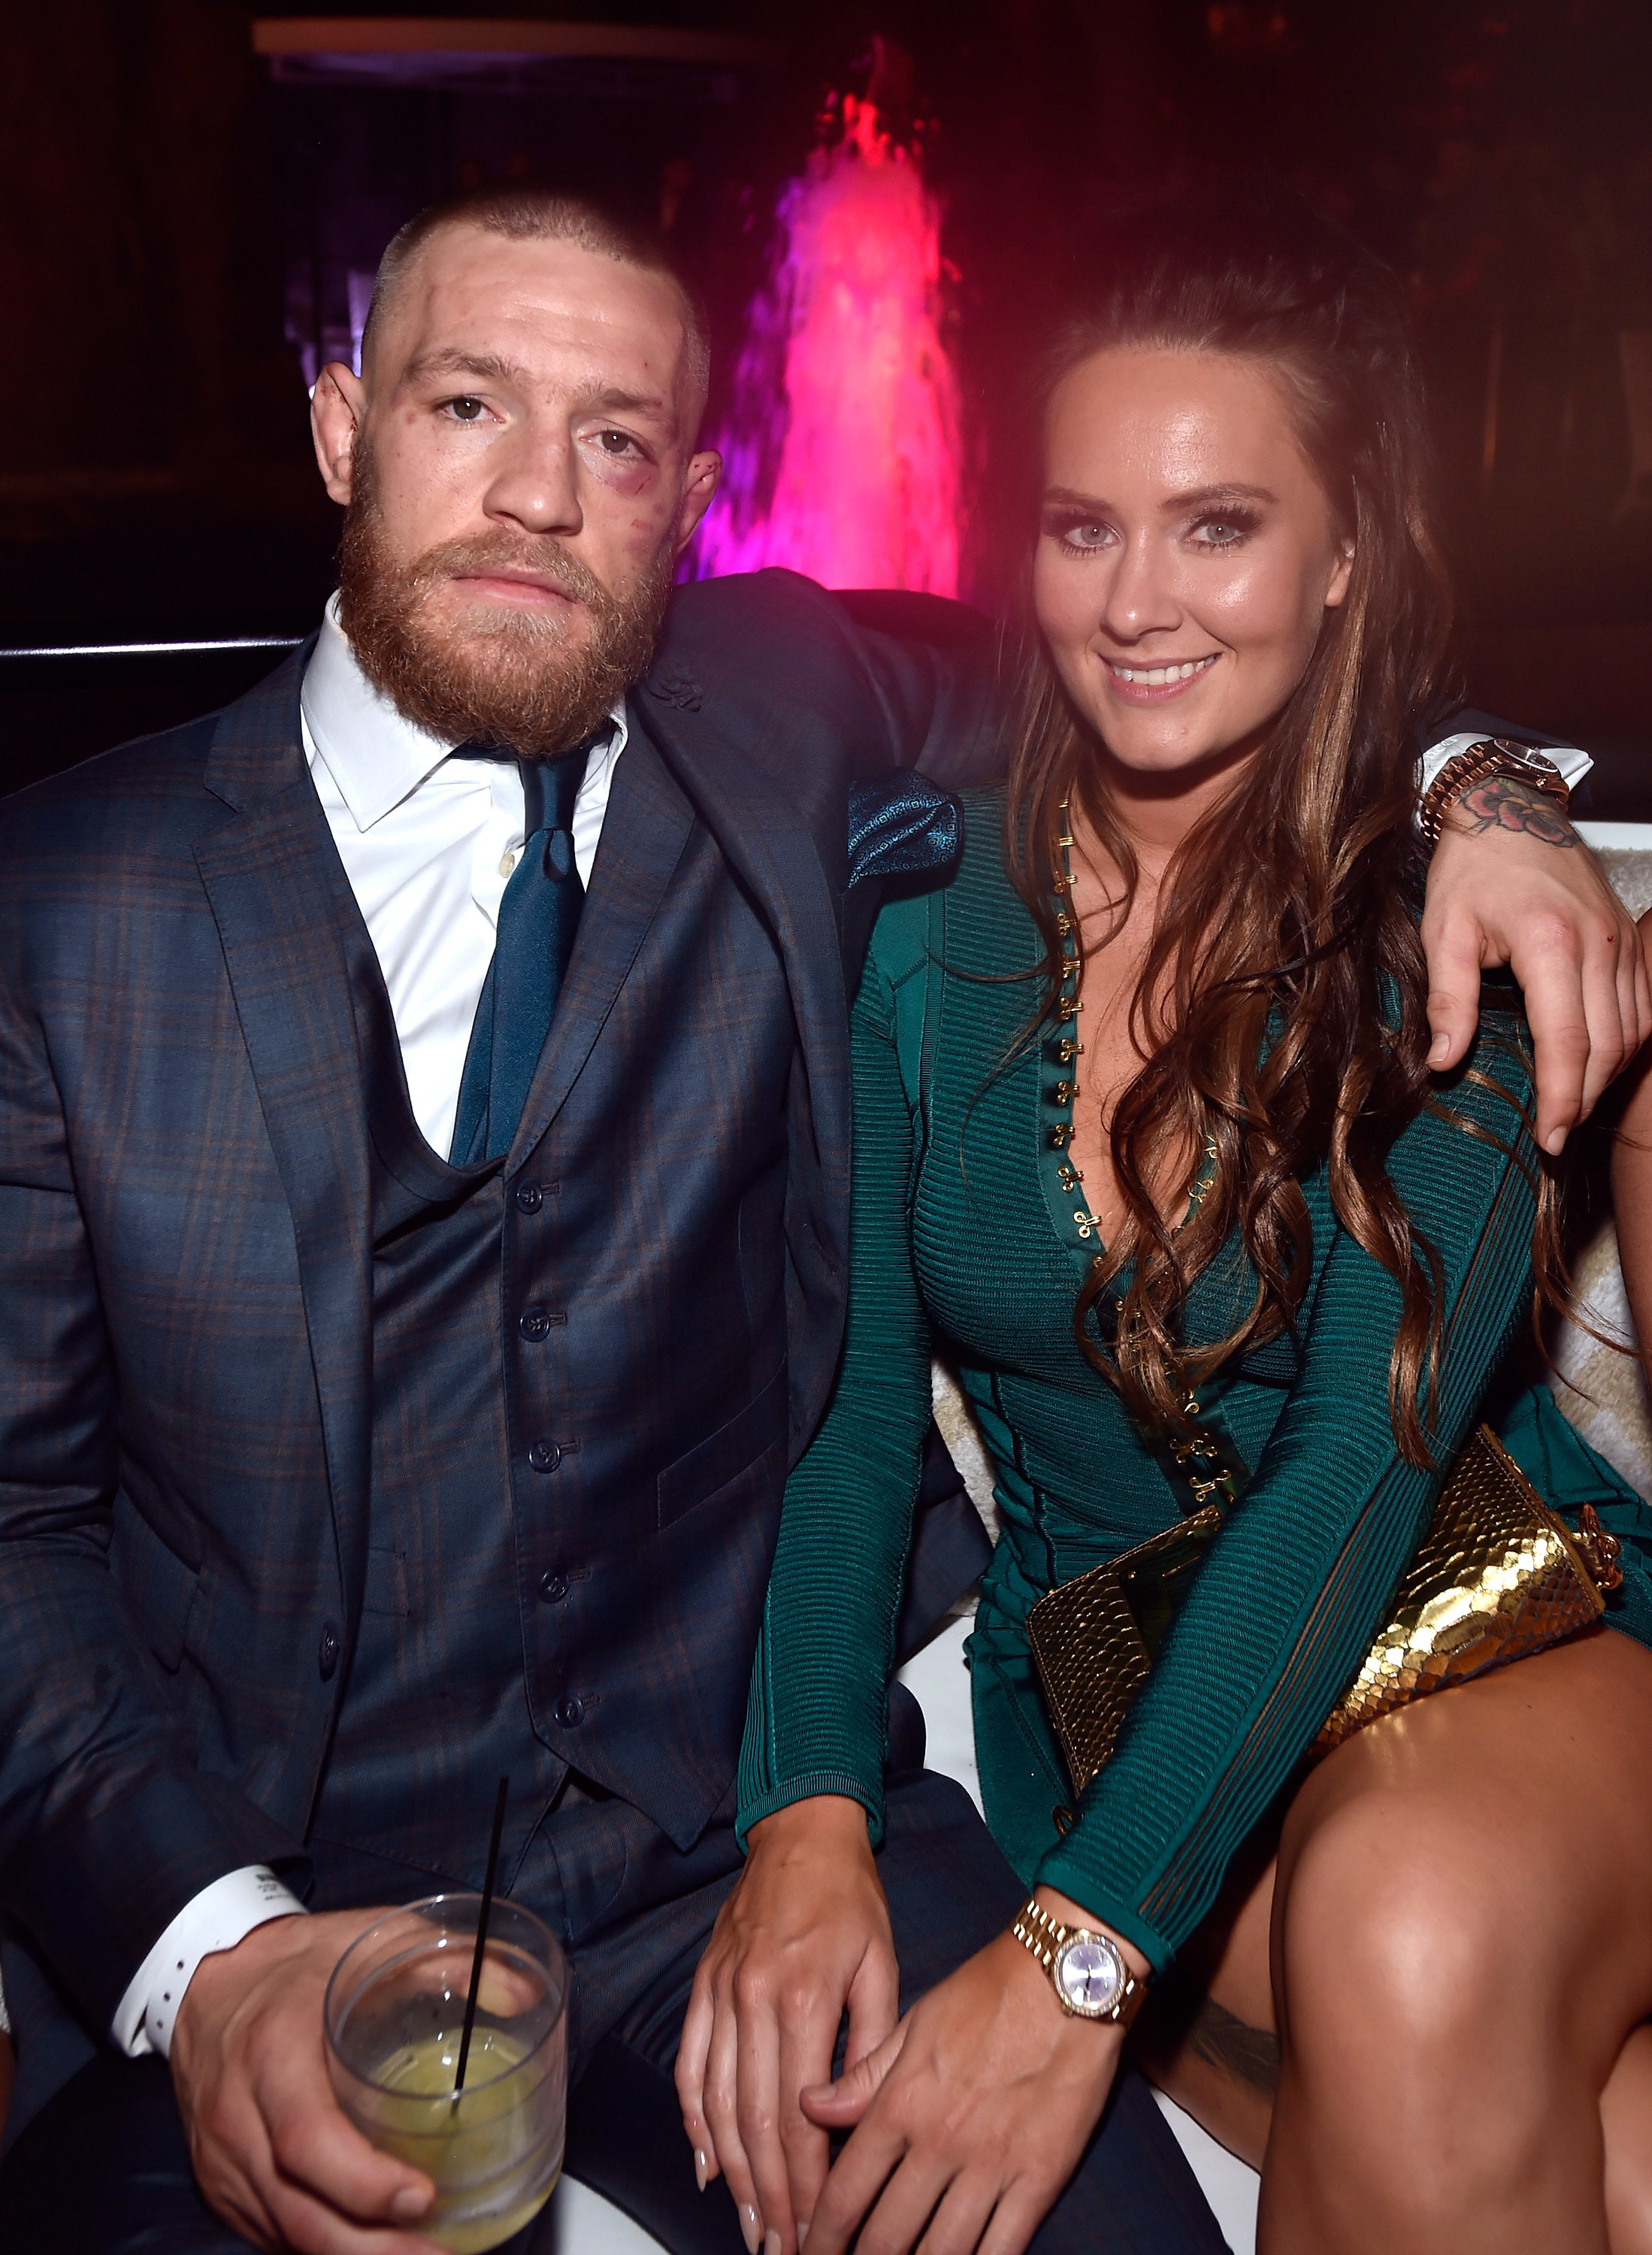 <p>During a 2017 appearance on Ireland's "Late Late Show," professional MMA fighter and boxer Conor McGregor told the story of how he got together with longtime love Dee Devlin nearly a decade earlier. "We met at a friend's party like way, way back and then the usual social media, a little bit of a like here, and a like there and then a message," he explained, soliciting laughs from the audience when he admitted that the social media platform they used was Bebo. Conor earlier told VIP Magazine that he first talked to Dee, who gave birth to their first child in 2017, at a nightclub. "I asked her to come over and we just started chatting," he said. "She seemed like a nice girl, and I like good girls." He now credits her belief in him as a big reason for his professional success.</p>